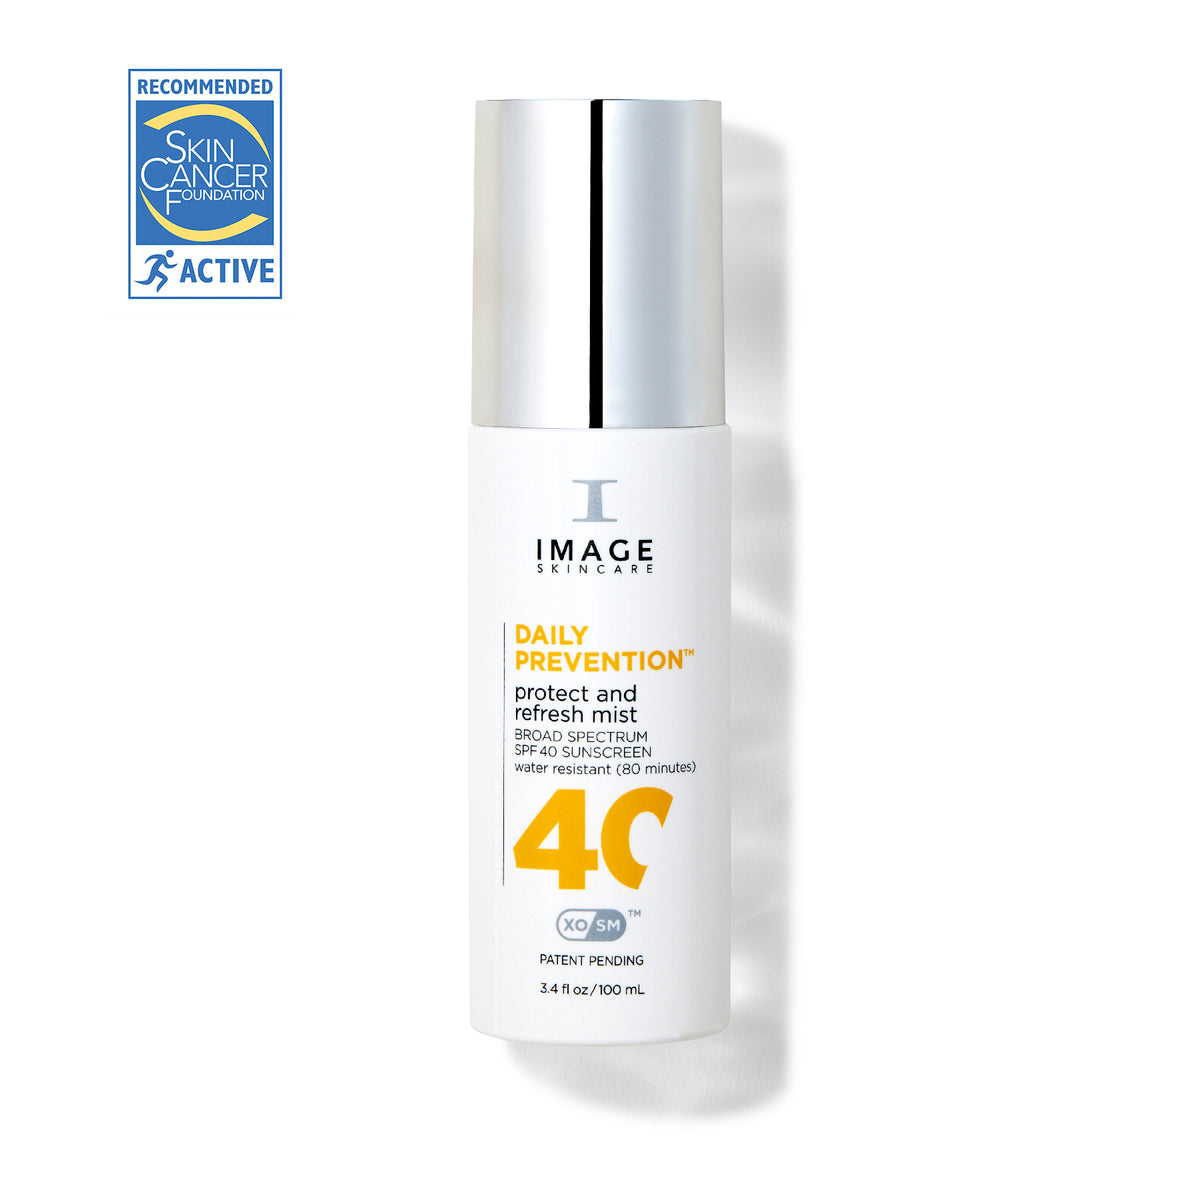 IMAGE SKINCARE Daily Prevention Protect and Refresh Mist